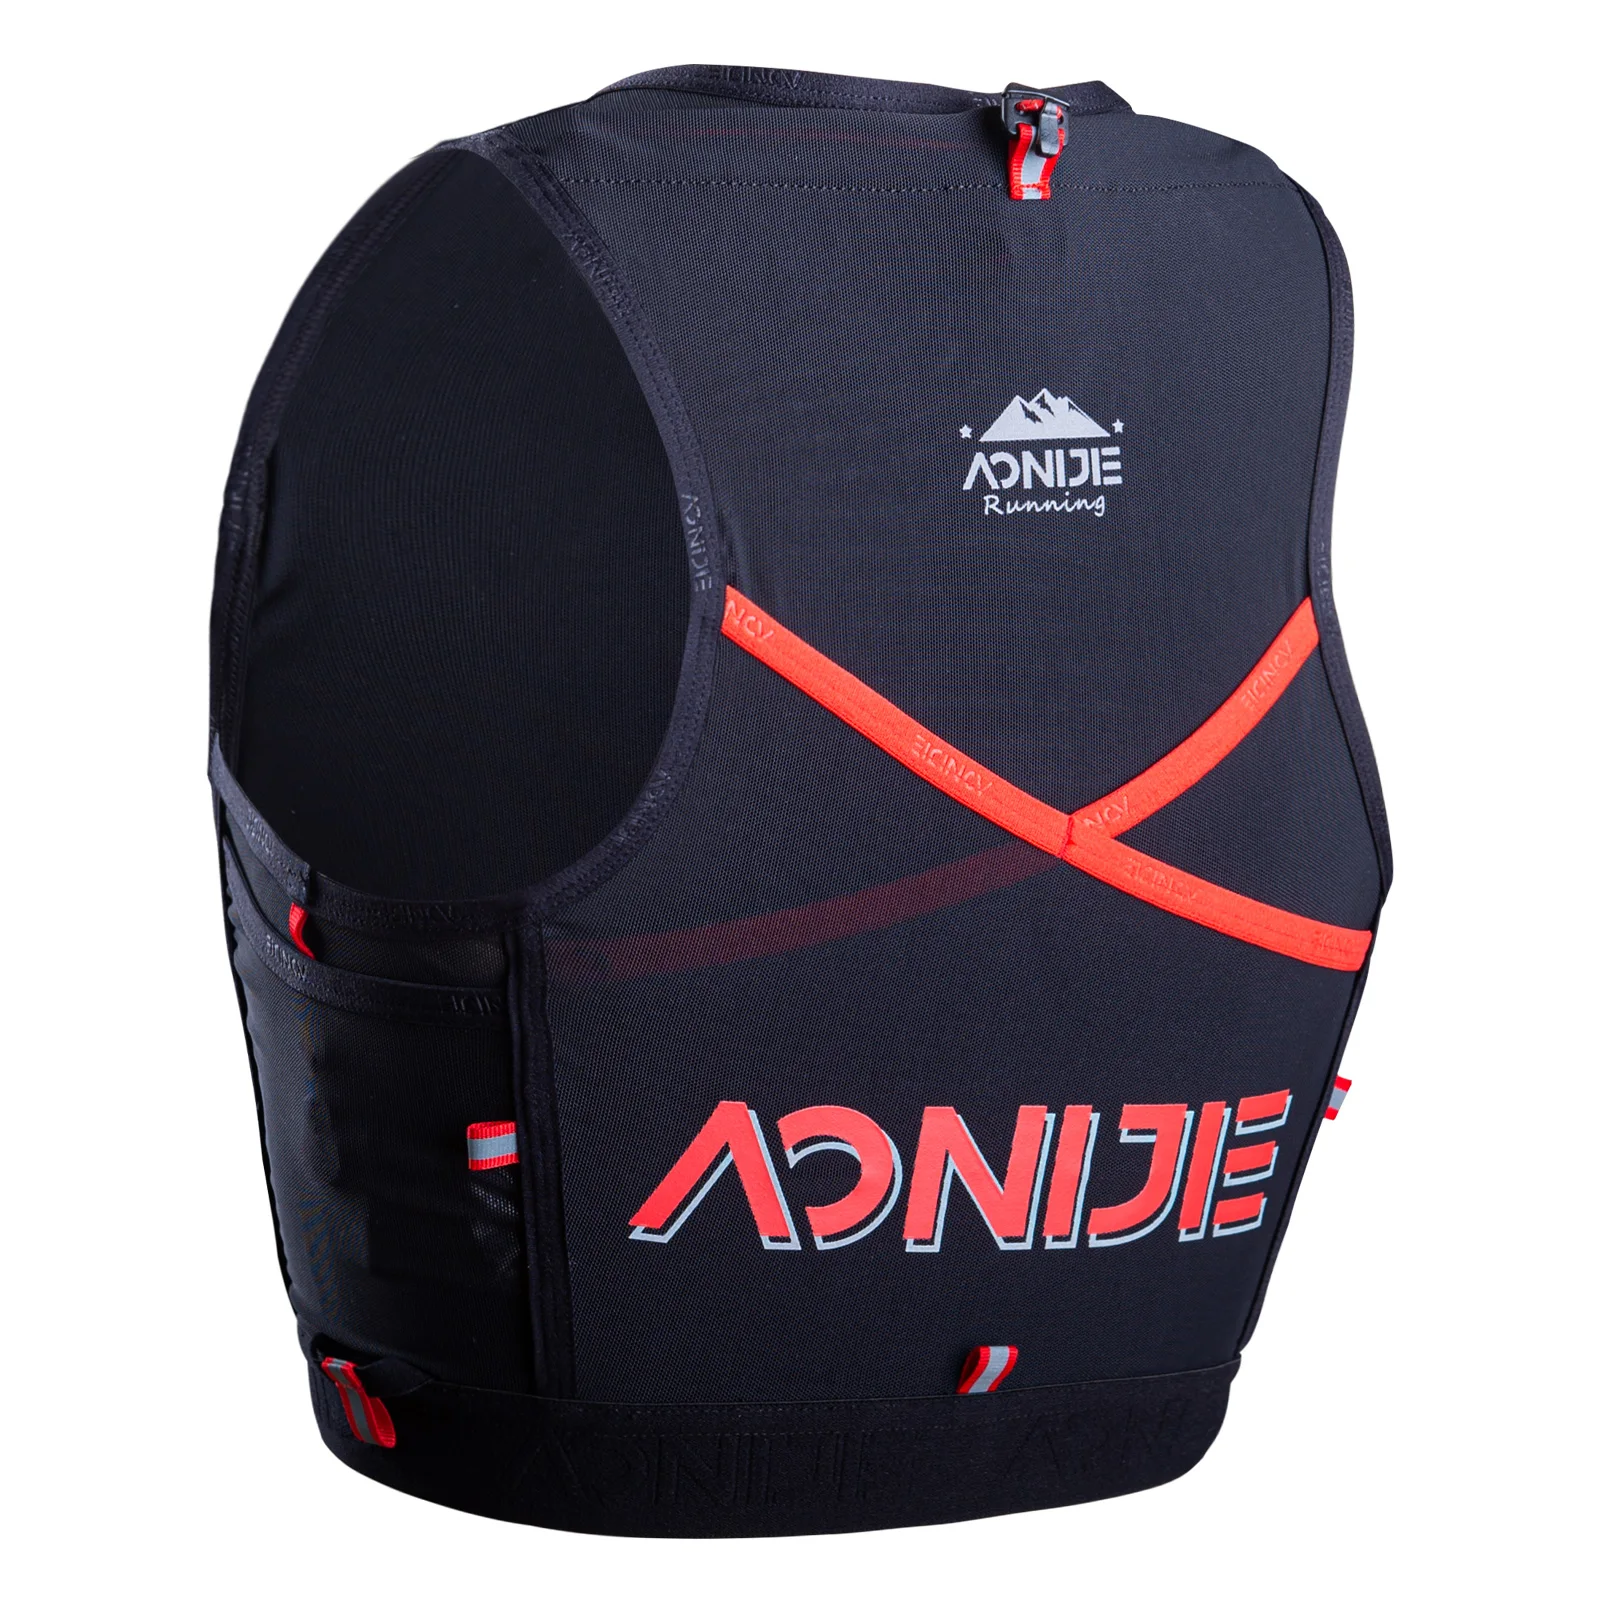 

AONIJIE Unisex Quick Dry Running Vest Close Fitting Hydration Pack Bag Weskit With Zipper For Outdoor Sports Marathon Race 10L